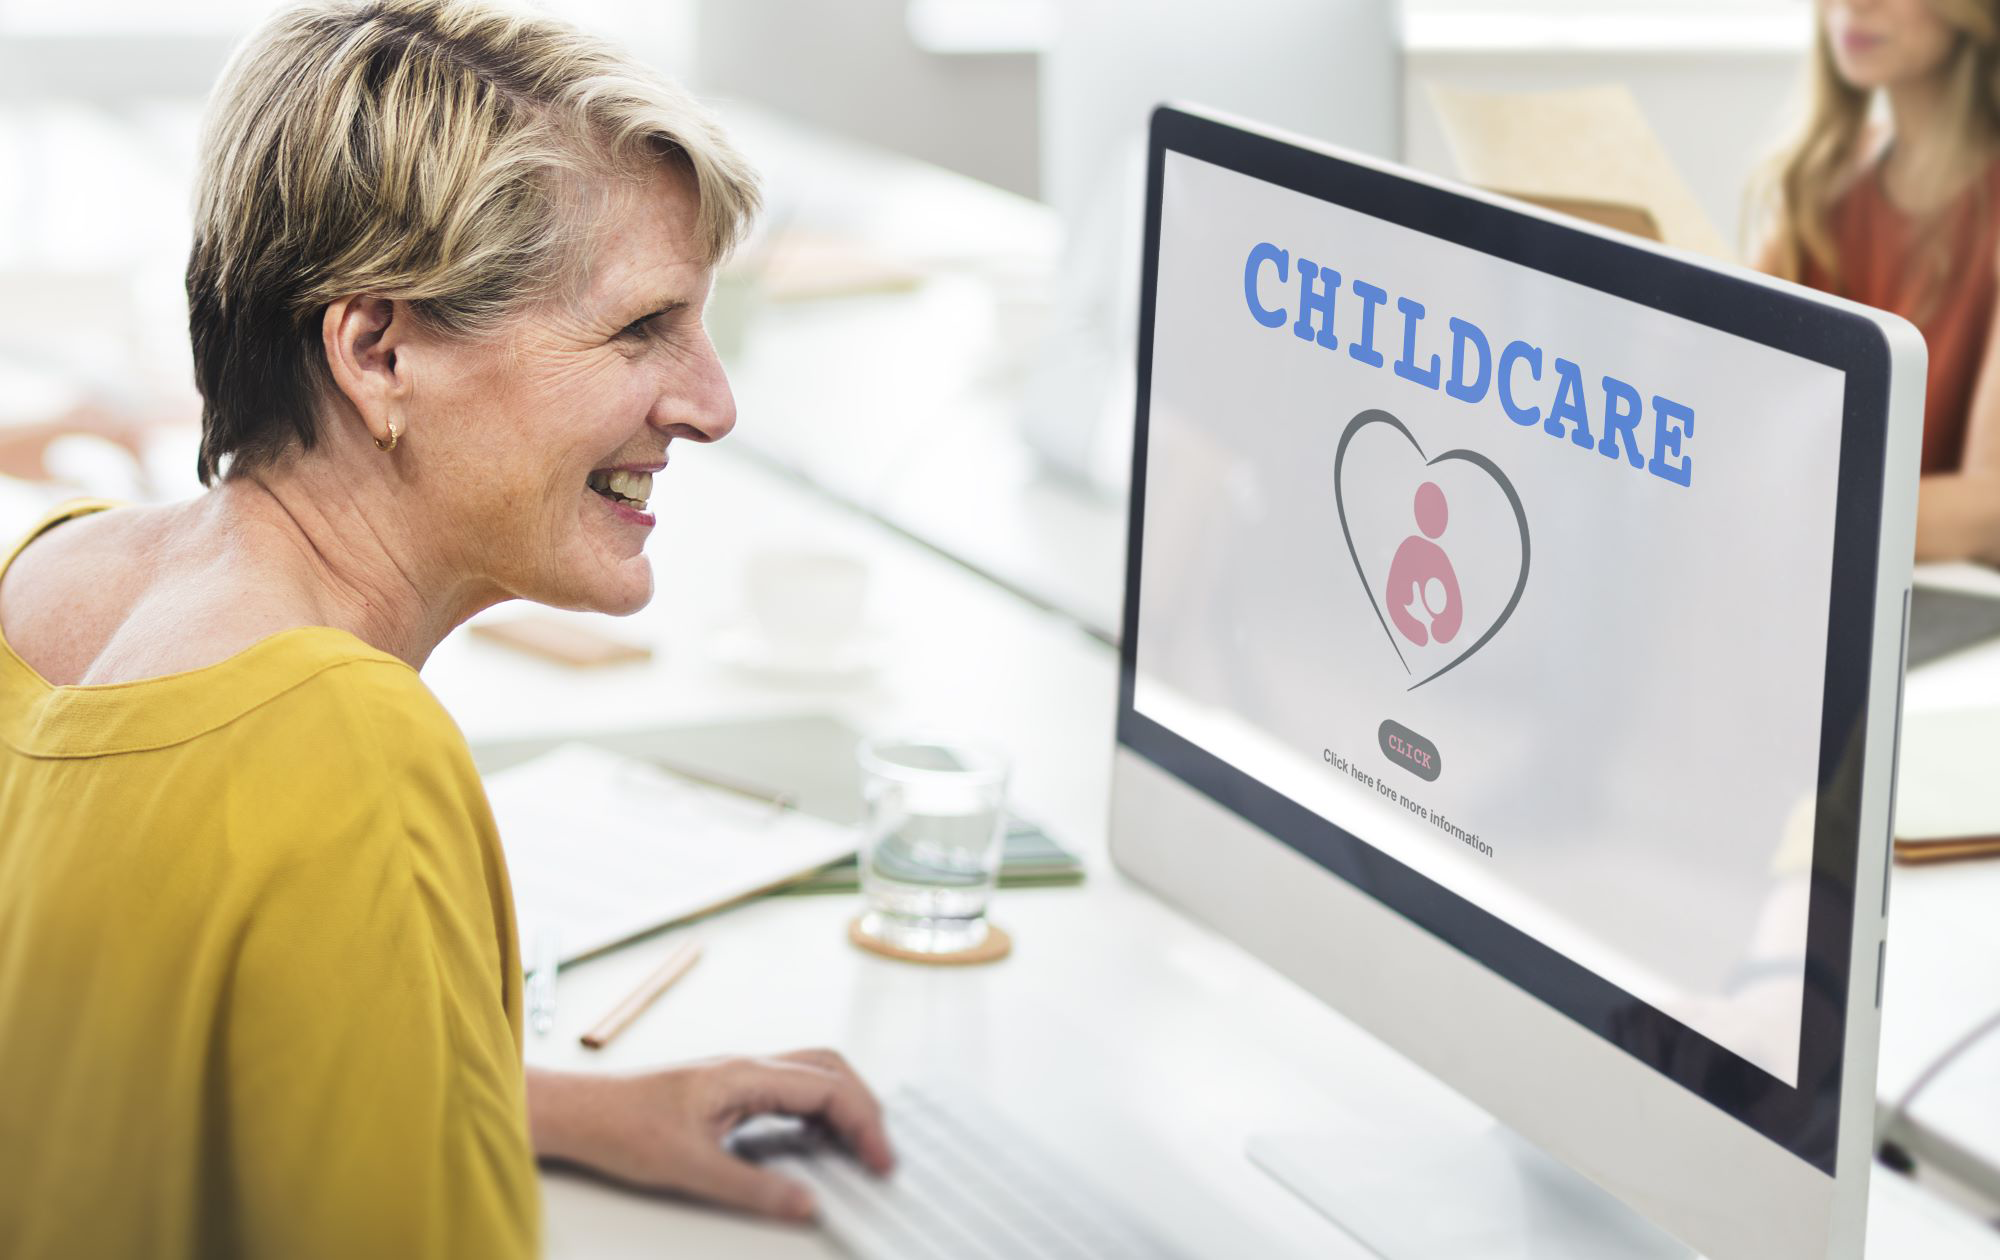 How to choose the right childcare management and administration software